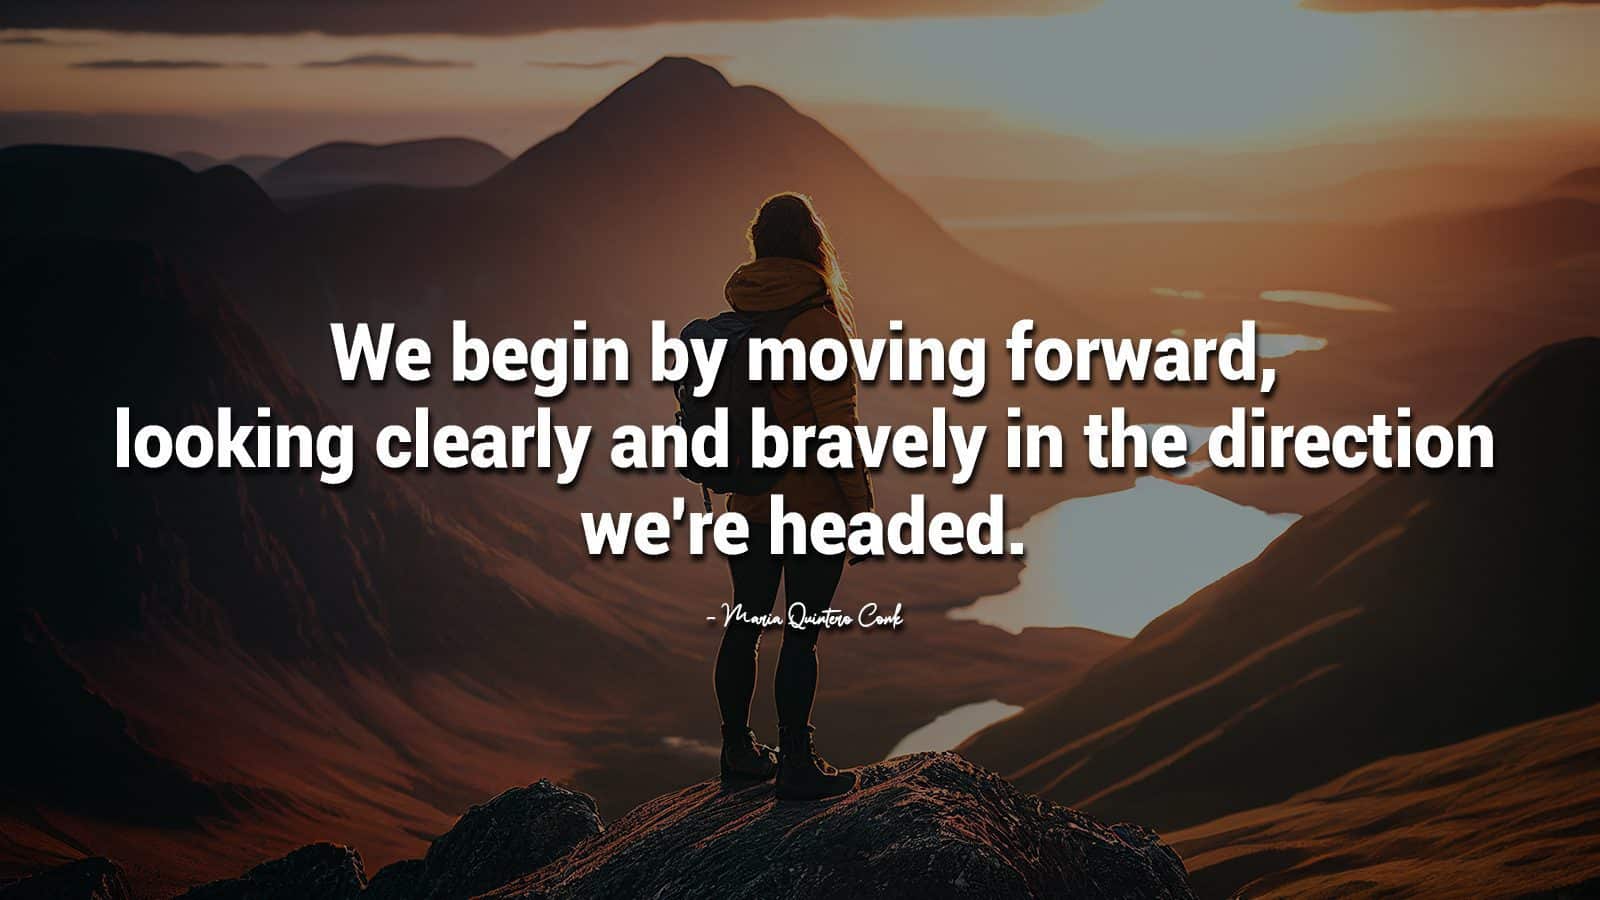 18 Quotes to Look Forward to a More Positive Life